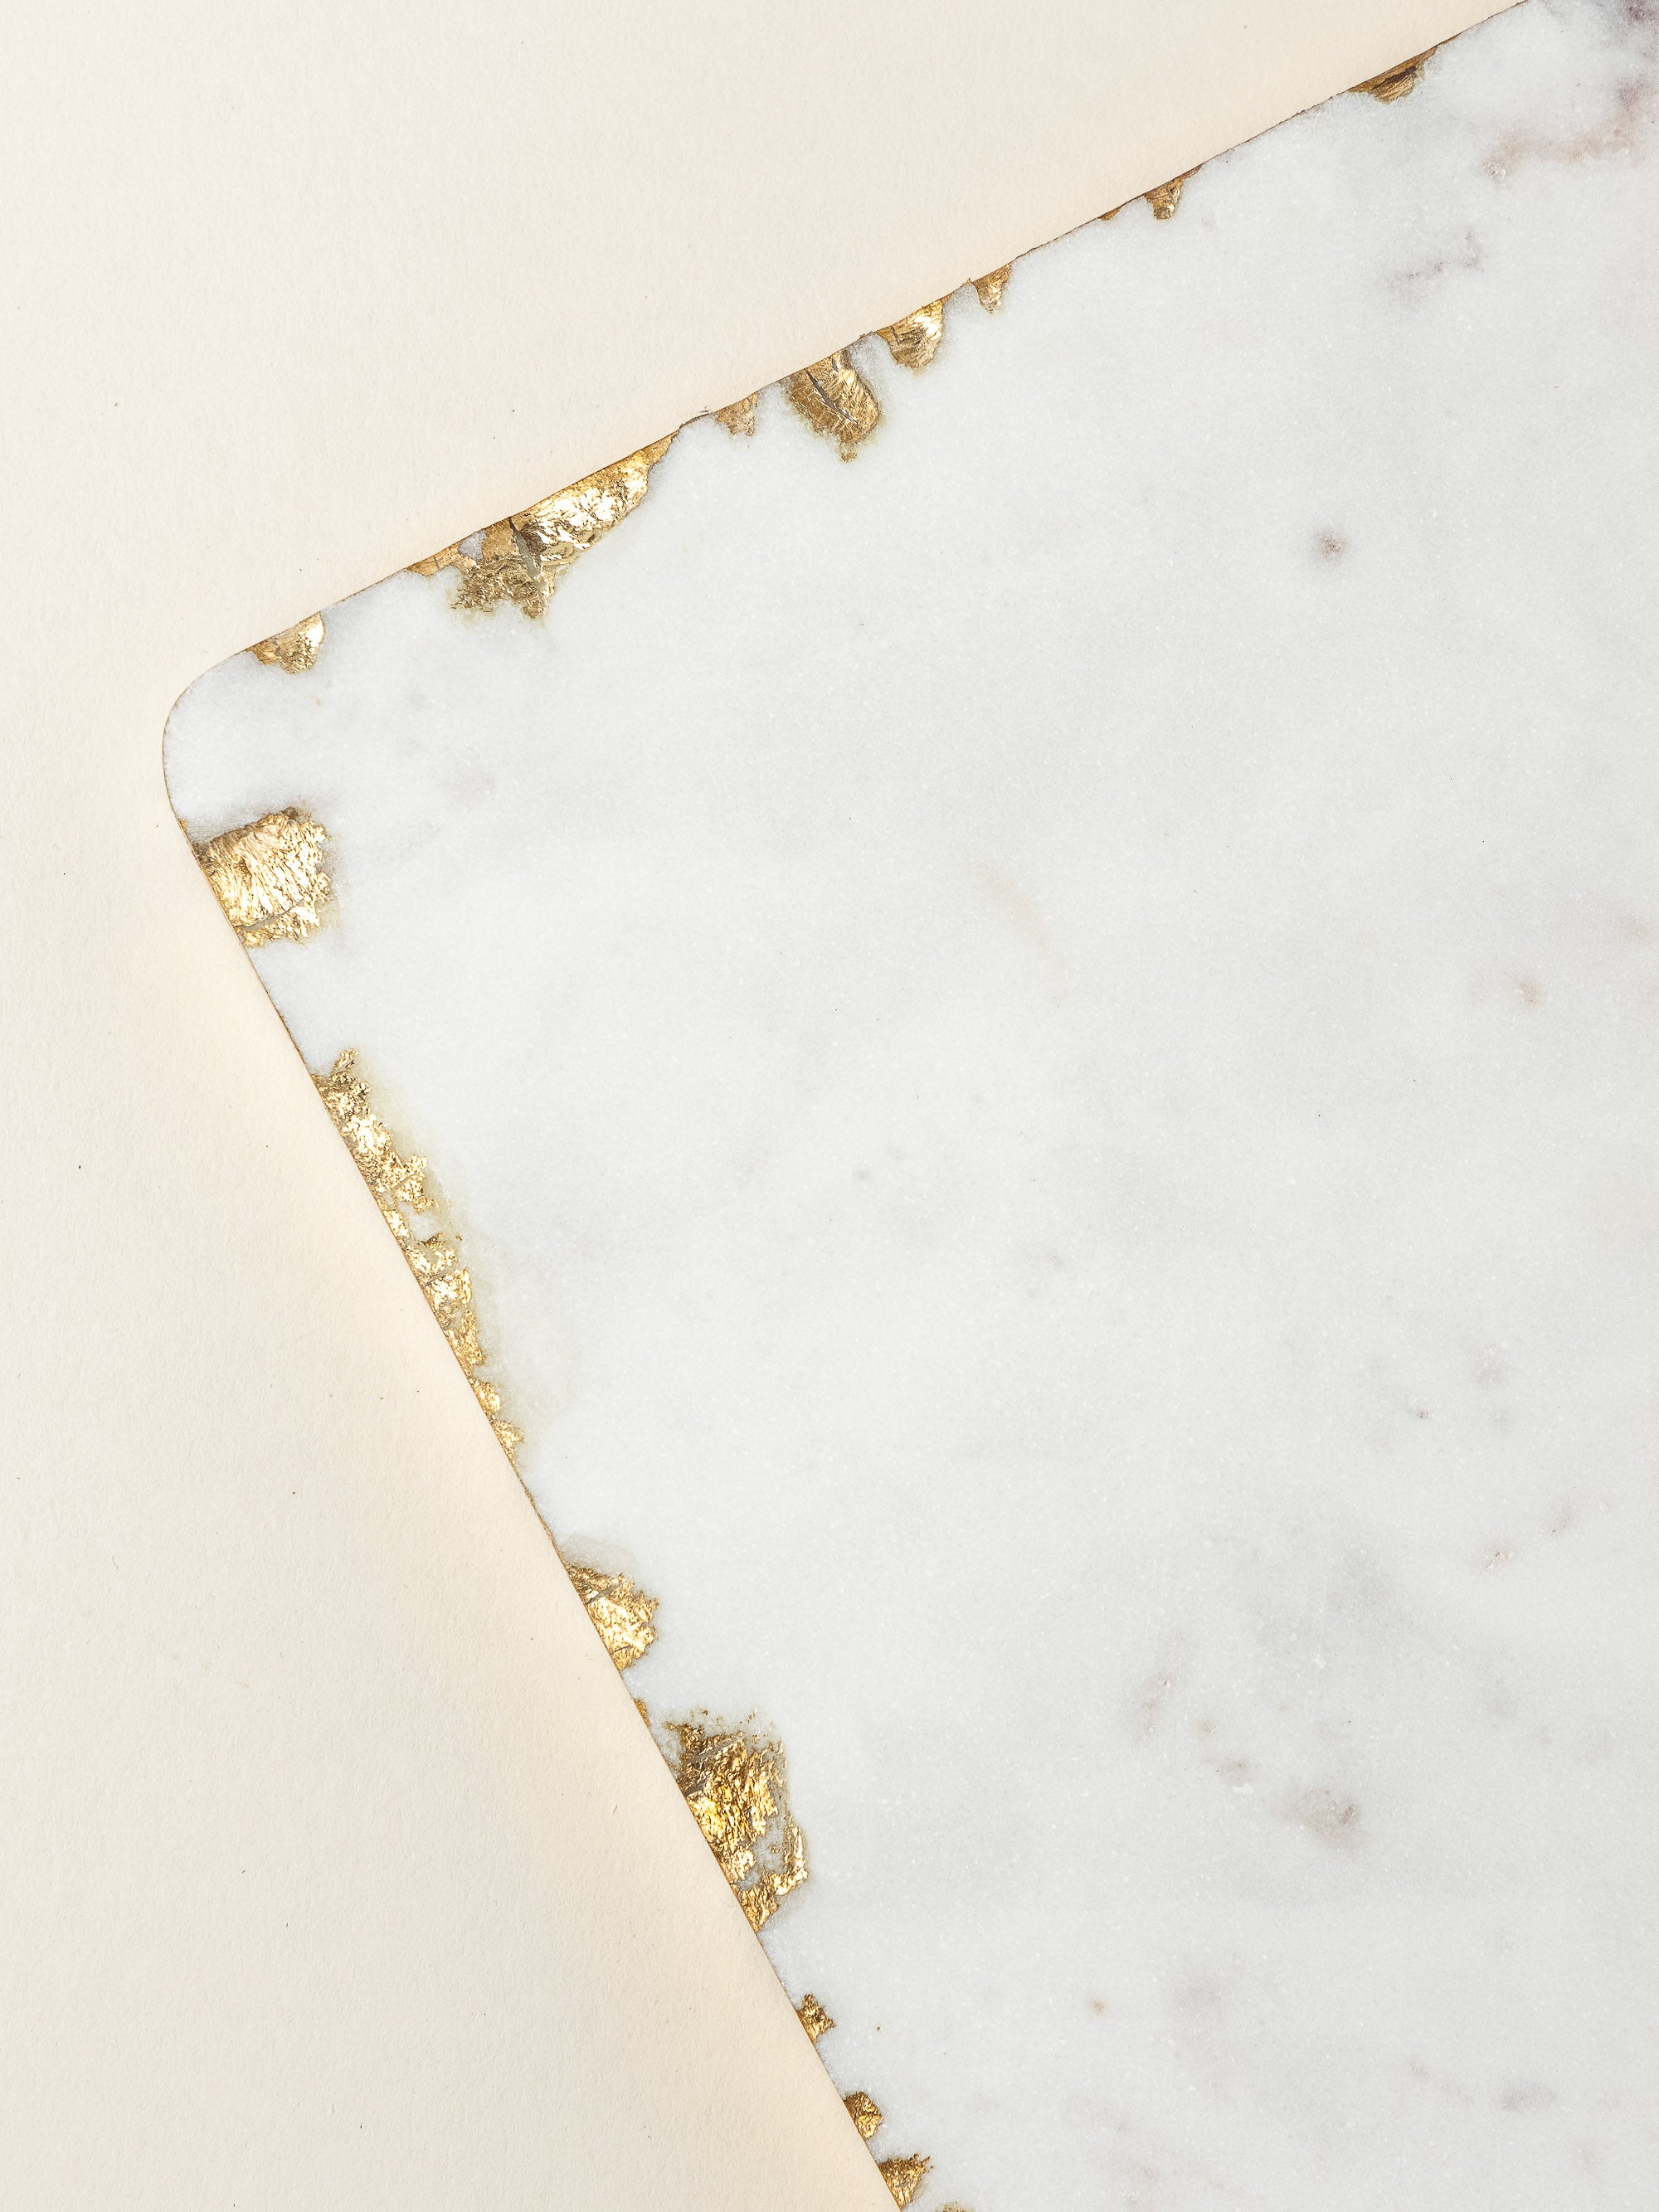 Serving Plate White Marble / Gold Foil